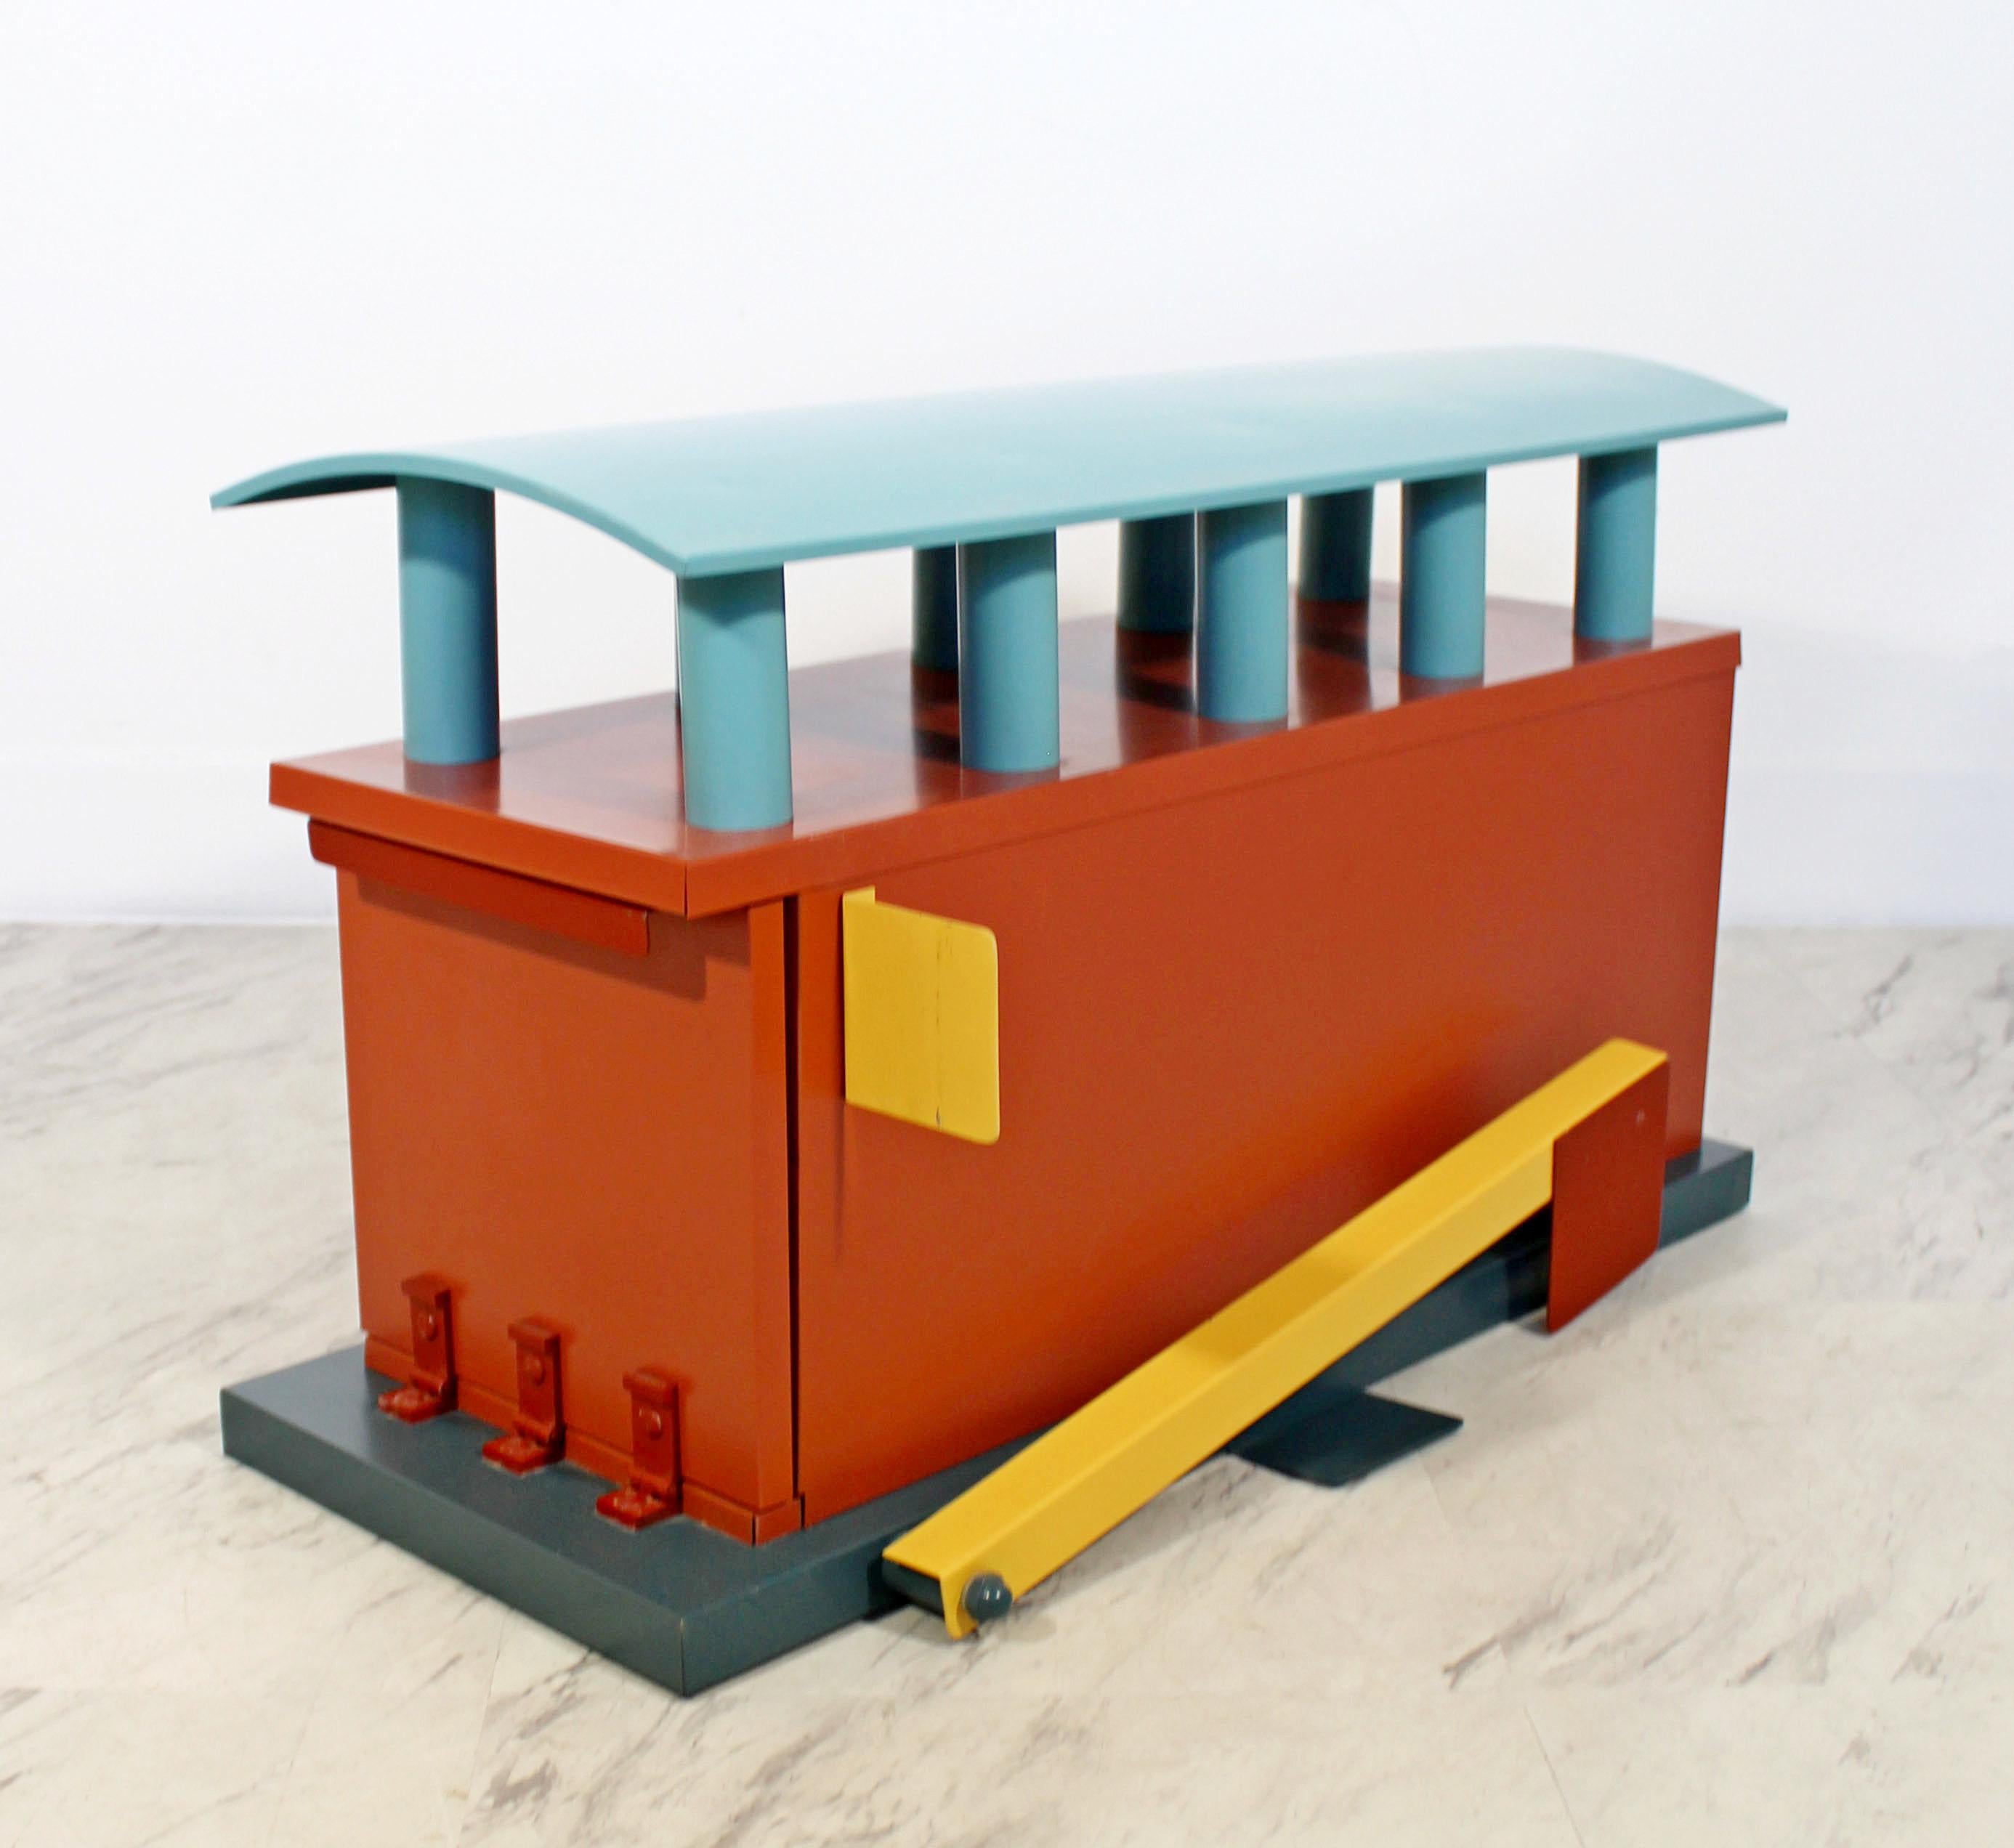 For your consideration is a phenomenal, decorative, metal mailbox by Michael Graves for Acme, circa 1990. In excellent condition. The dimensions are 23.5